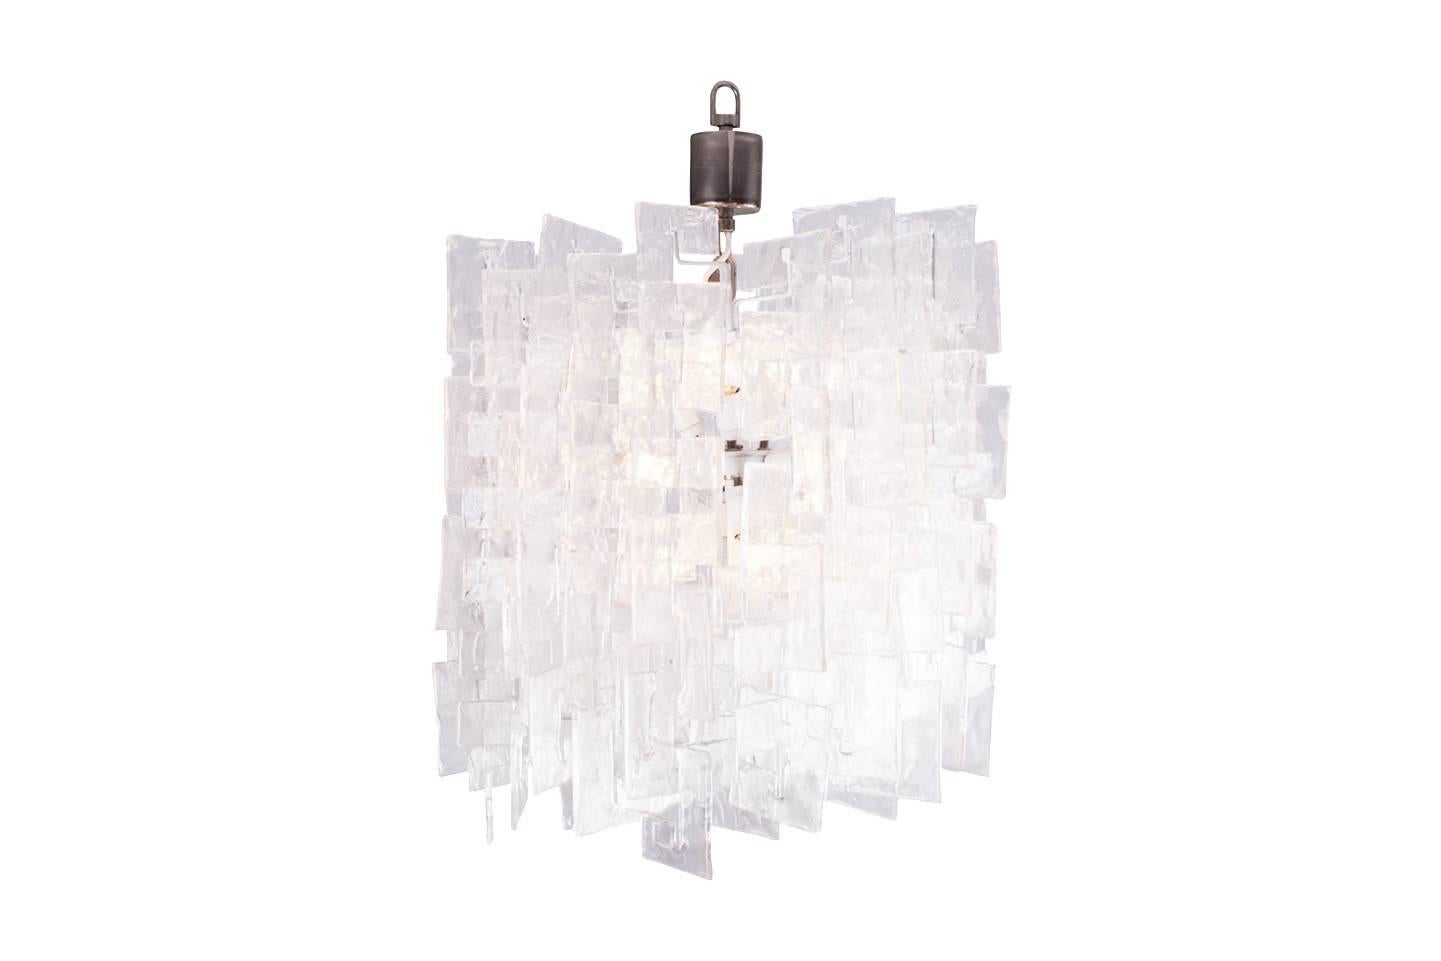 Mid-Century Modern chandelier designed by Carlo Nason for Mazzega with interlocking opalescent glass pieces.
This is one of the biggest of its kind at with 12 lighting points inside compared to mostly six and a diameter of 65 cm and height of 80